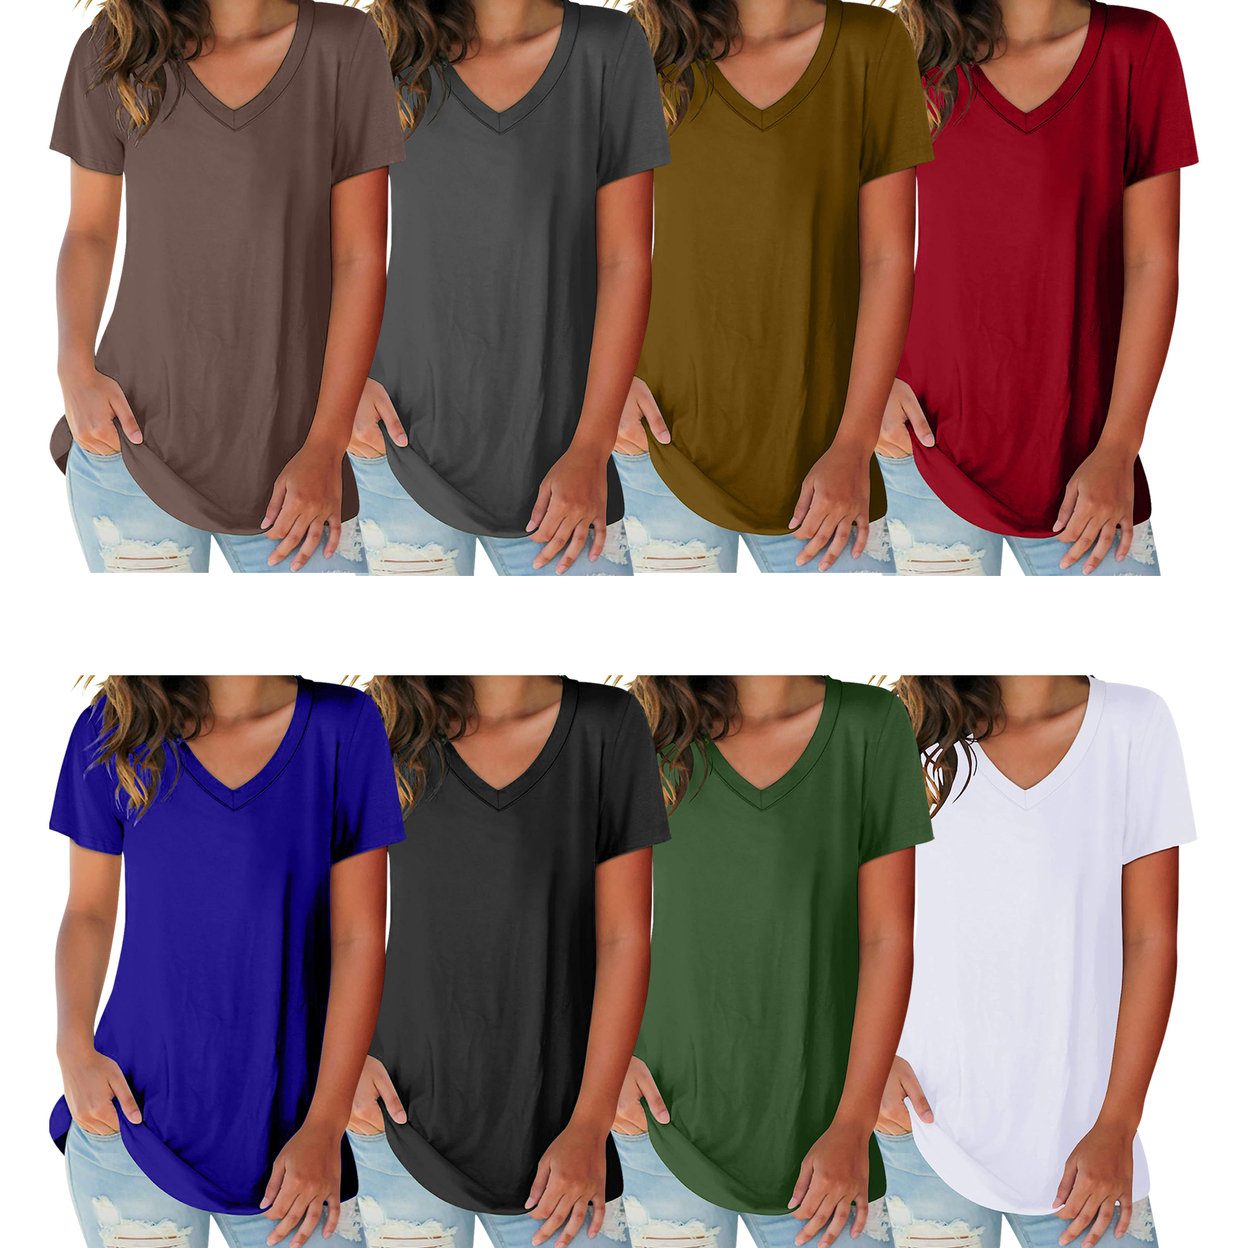 2-Pack: Women's Ultra Soft Smooth Cotton Blend Basic V-Neck Short Sleeve Shirts - Grey & Brown, Small